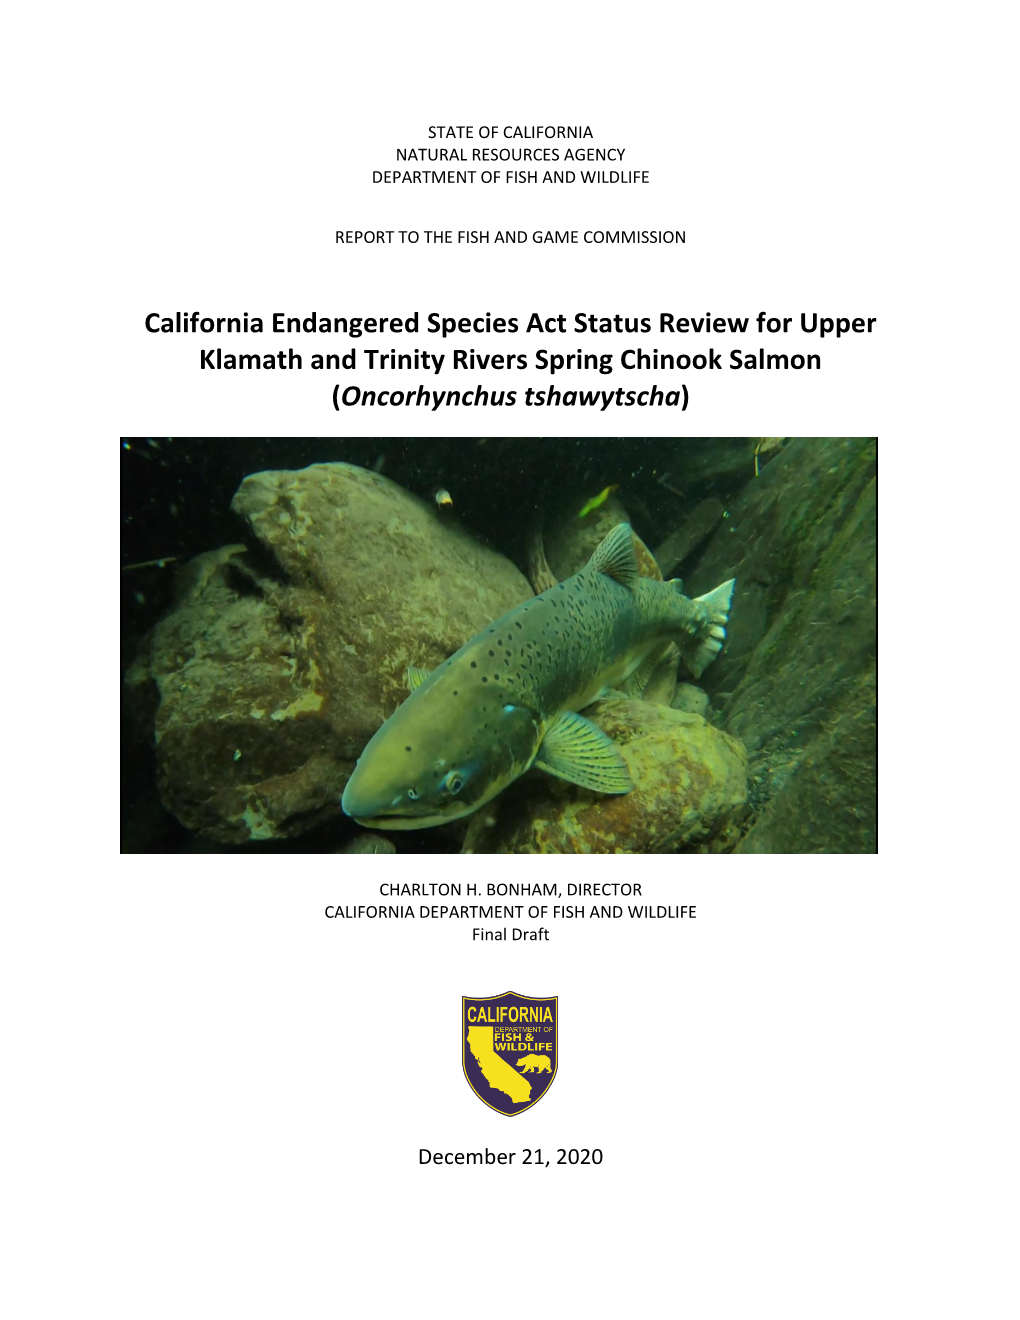 California Endangered Species Act Status Review for Upper Klamath and Trinity Rivers Spring Chinook Salmon (Oncorhynchus Tshawytscha)